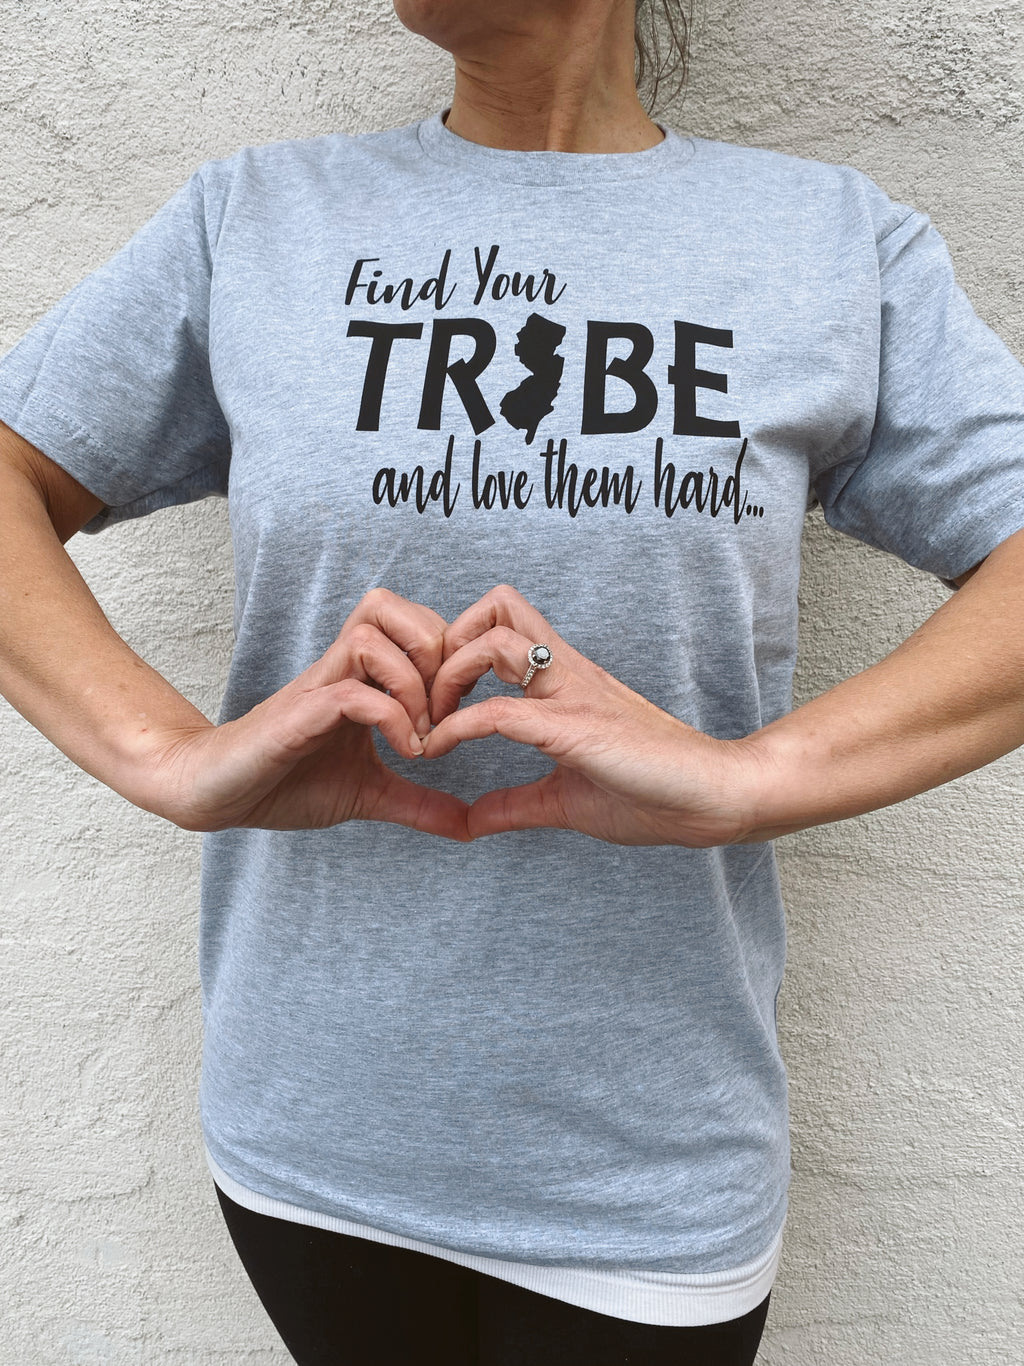 Find Your Tribe T-Shirt